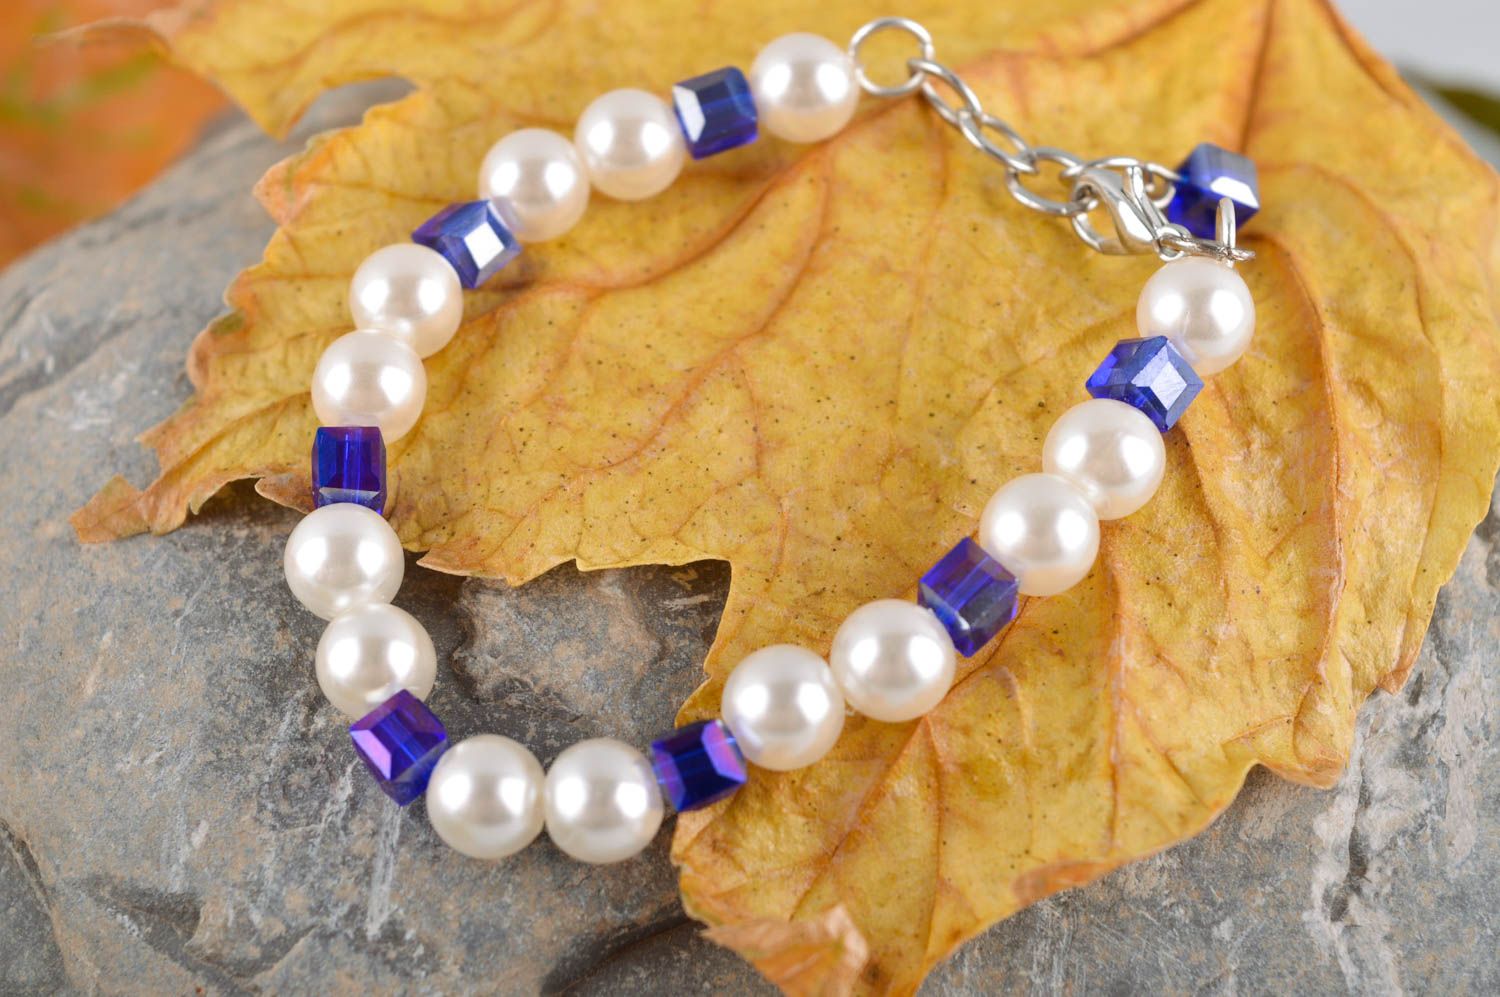 White and blue beads chain bracelet for young girls photo 1